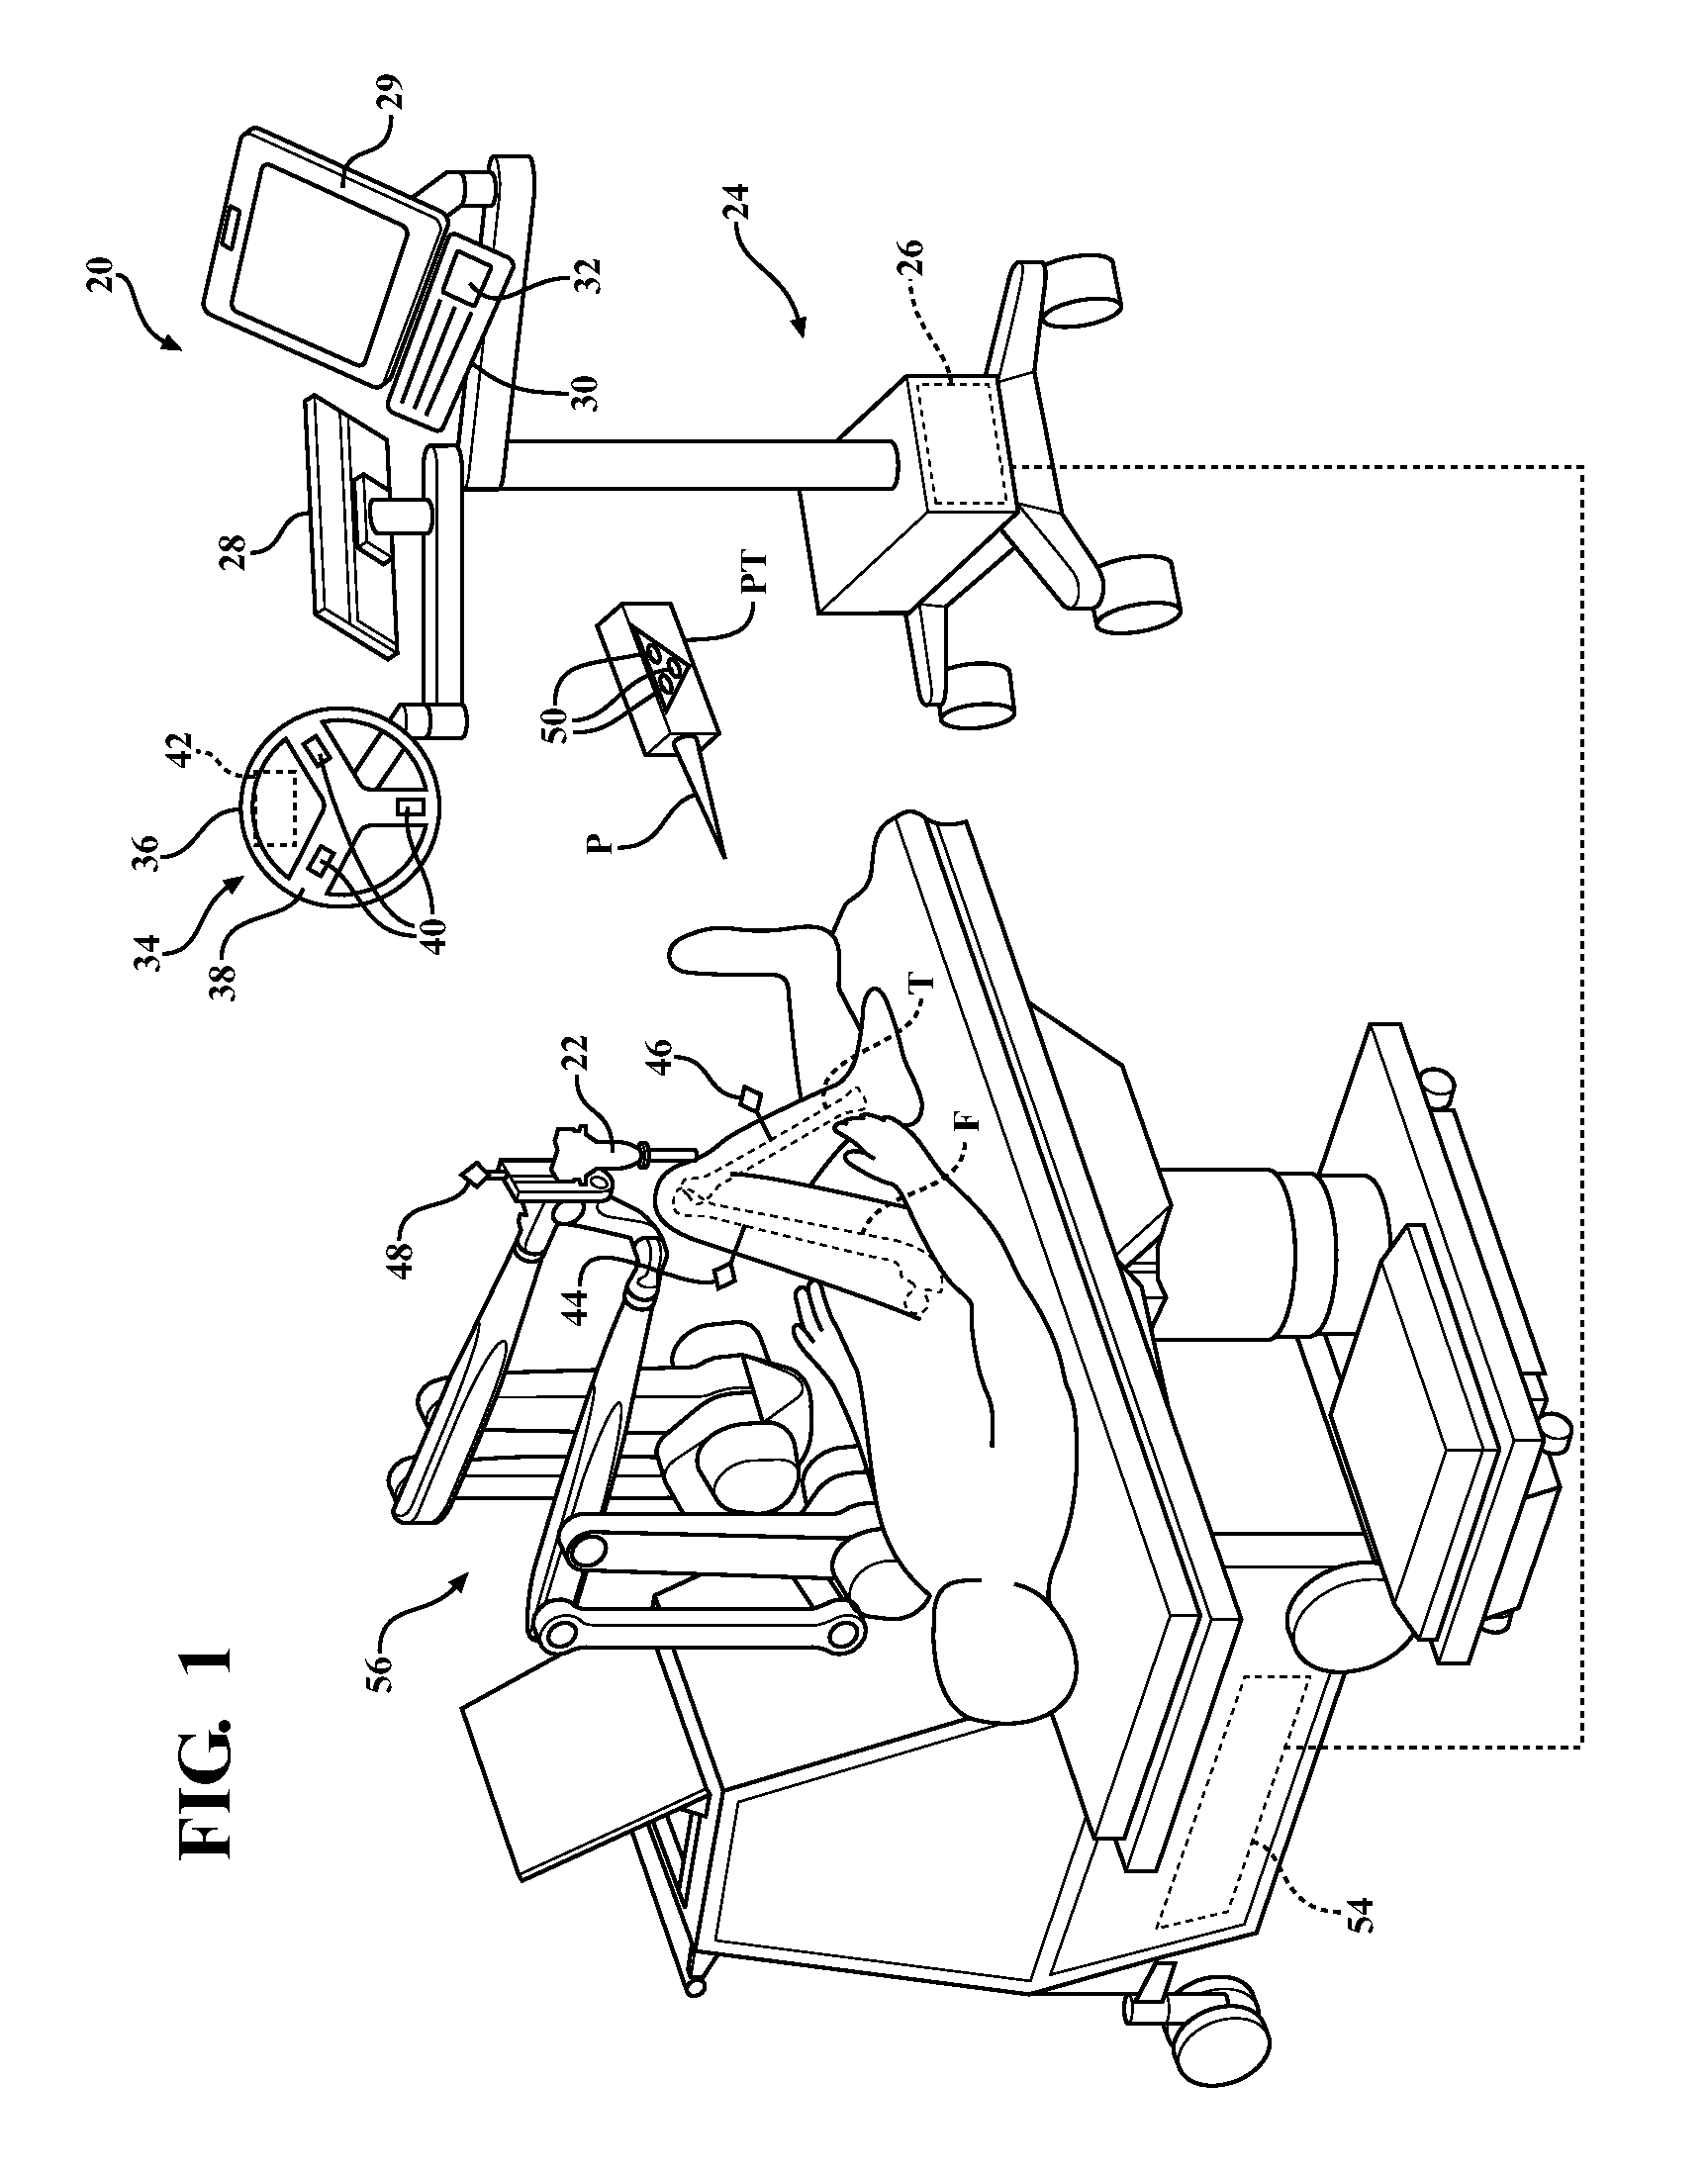 Navigation system including optical and non-optical sensors